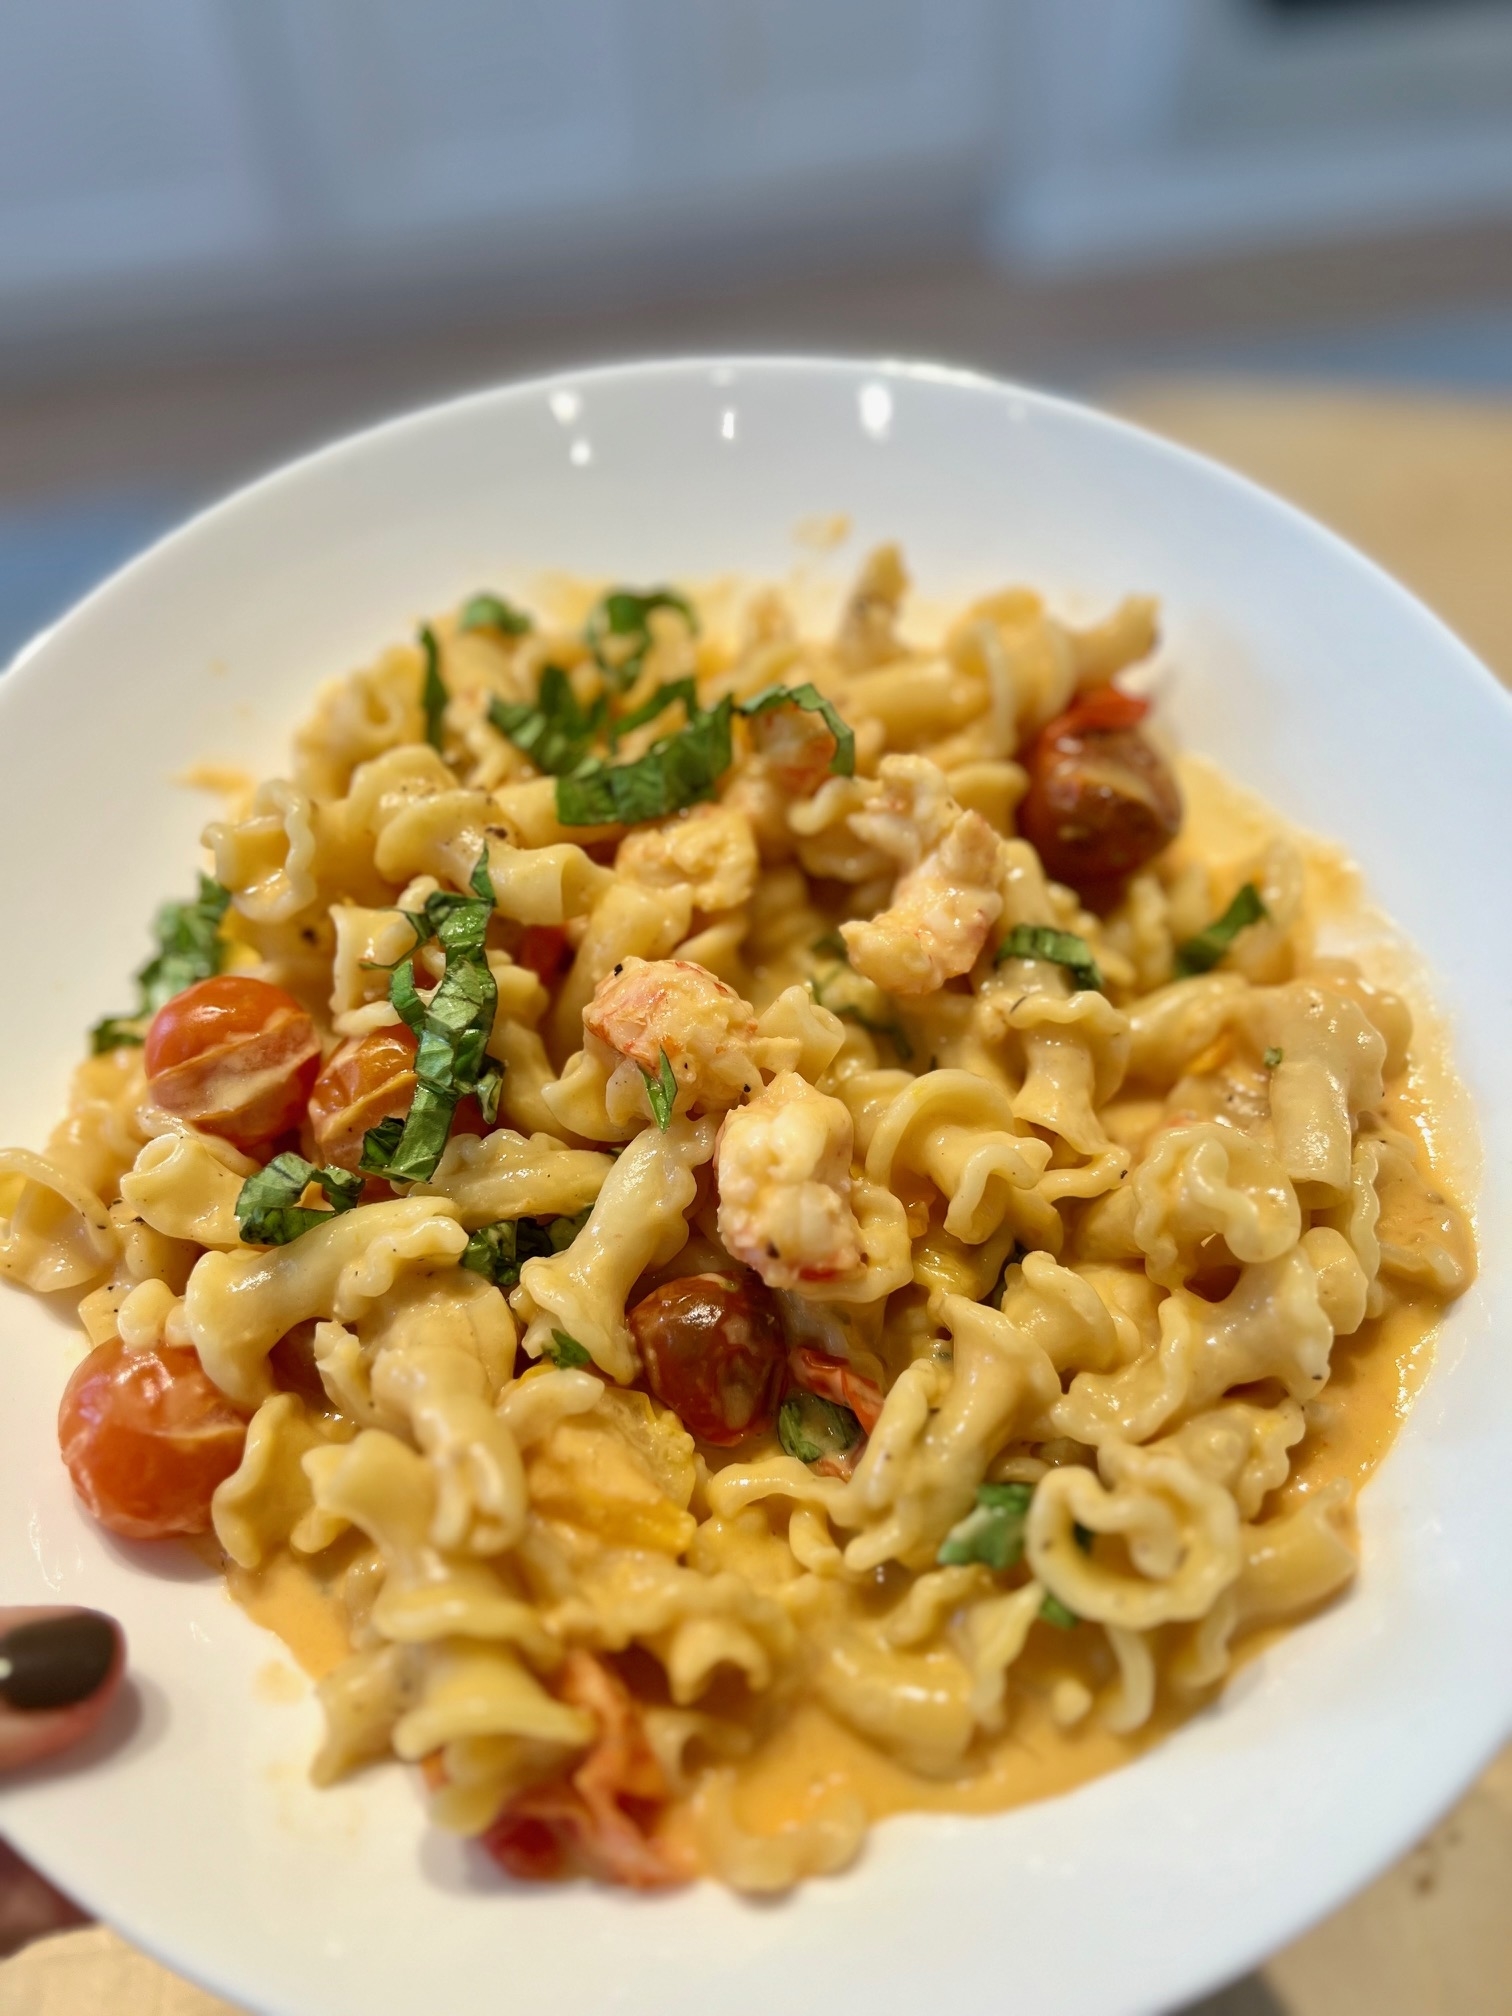 Lobster pasta with tomato and basil